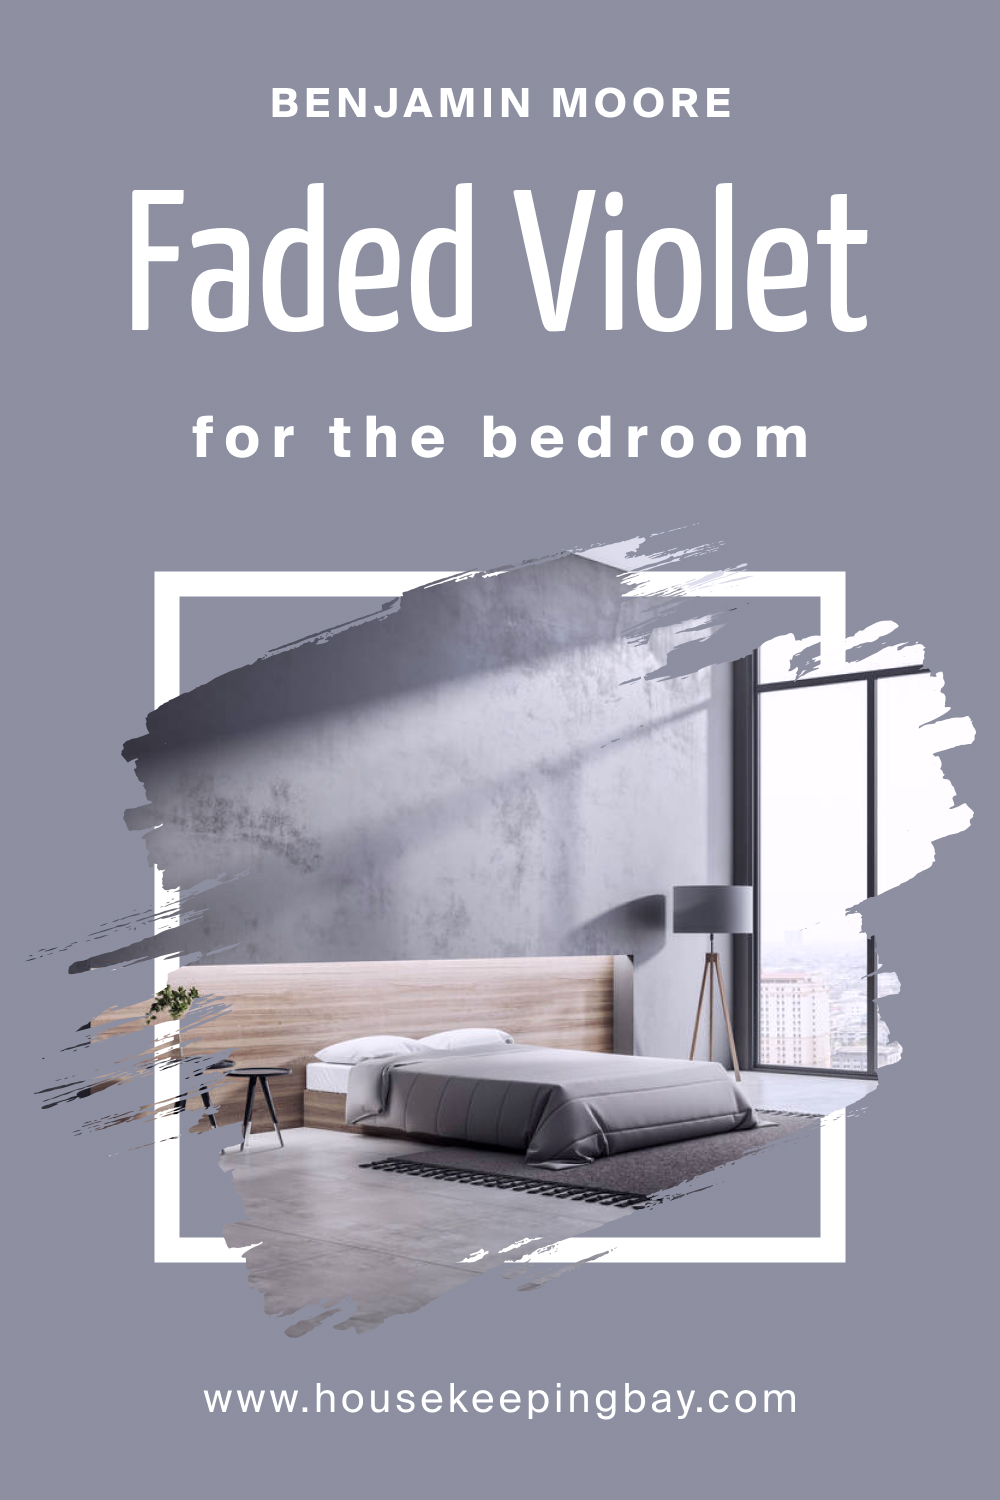 How to Use Faded Violet CSP-455 in the Bedroom?